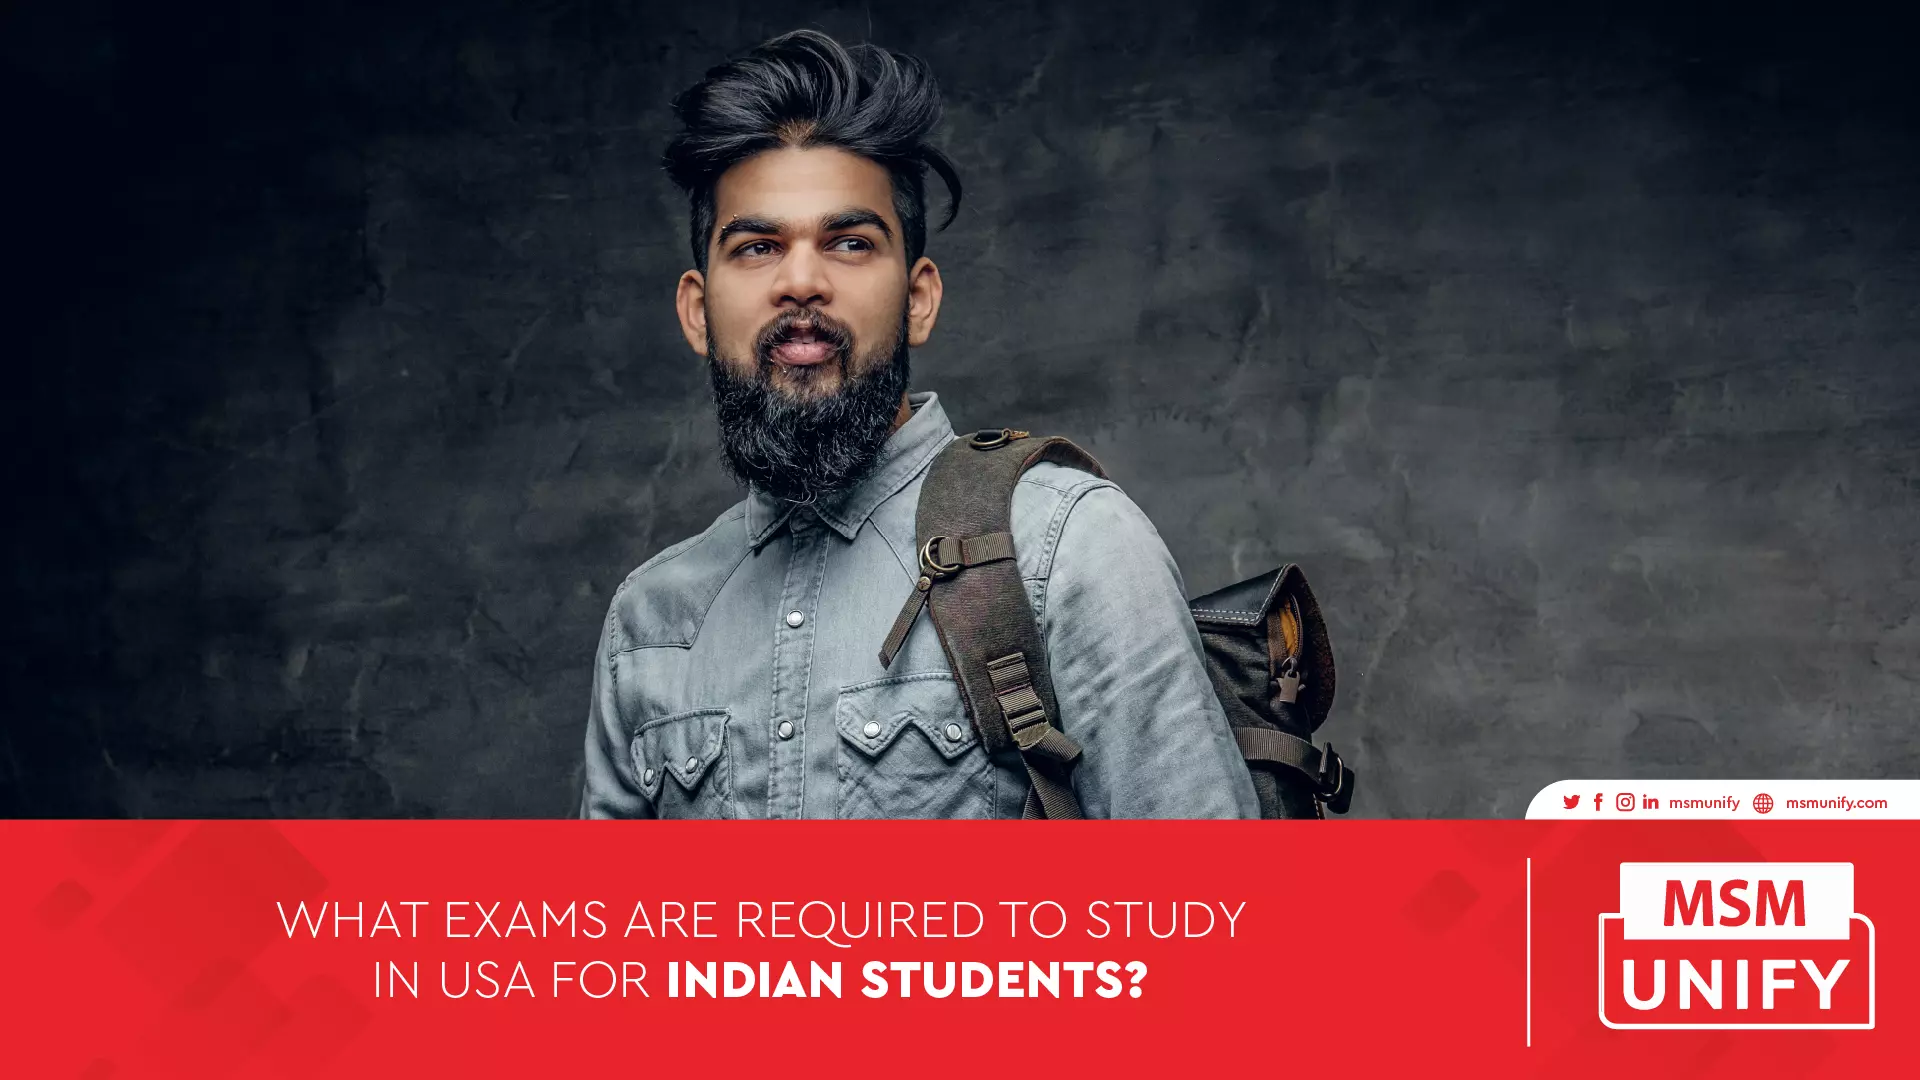 112522 MSM Unify What Exams Are Required to Study in USA for Indian Students 01